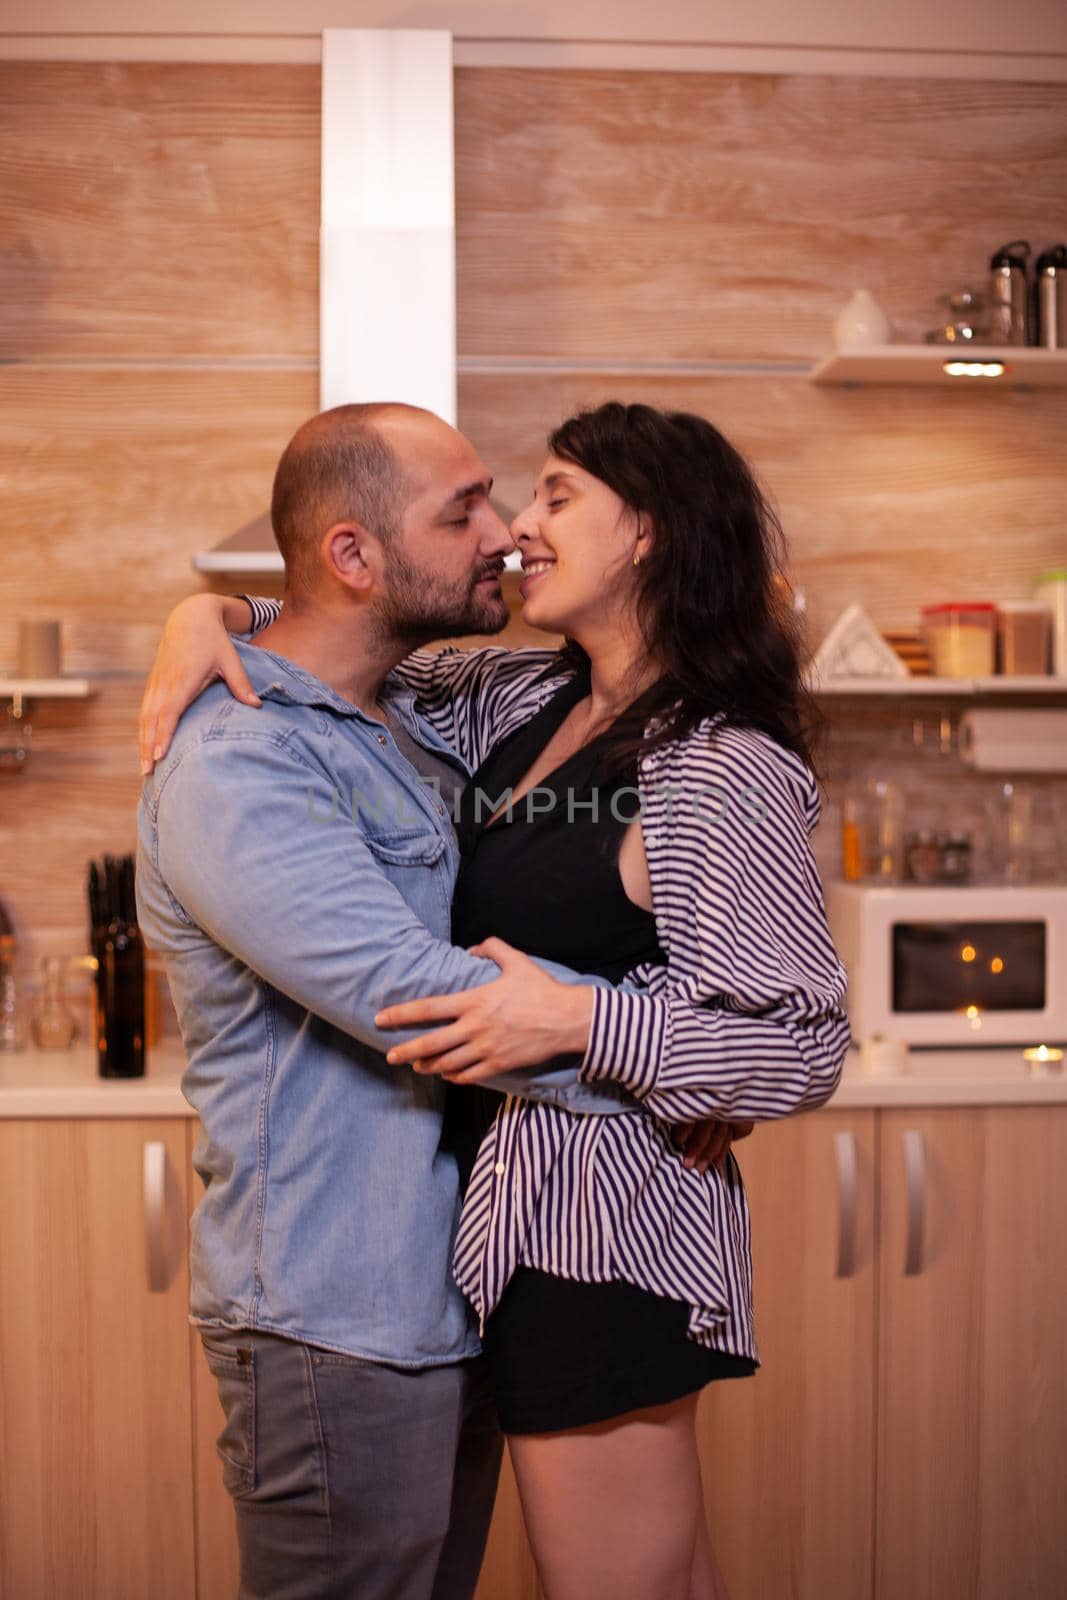 Couple feeling good while dancing in kitchen during dinner. Happy in love couple dining together at home, enjoying the meal, smiling, having fun, celebrating their anniversary.